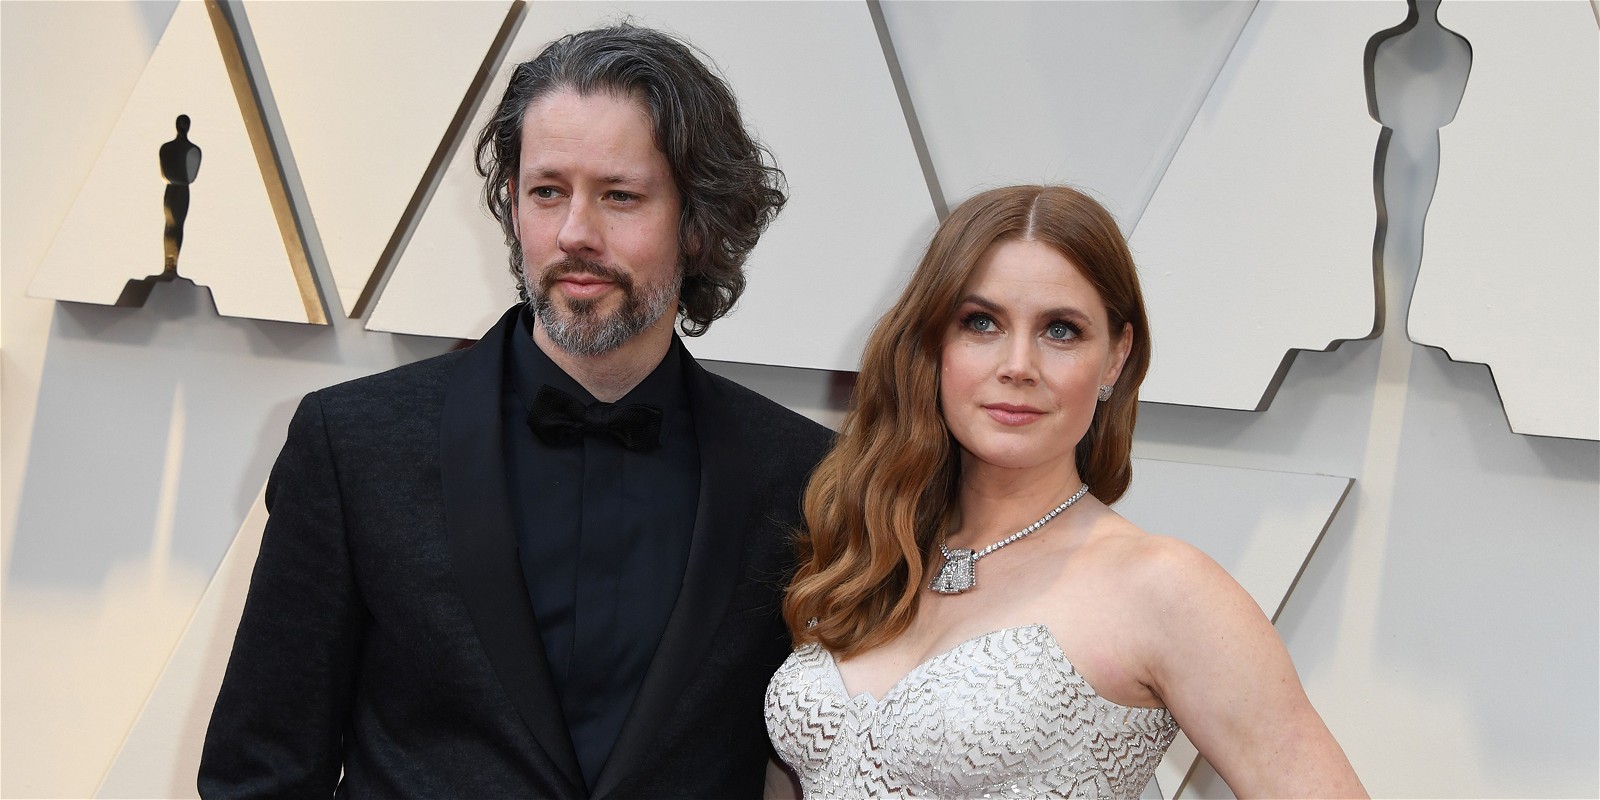 Amy Adams and her husband Darren Le Gallo